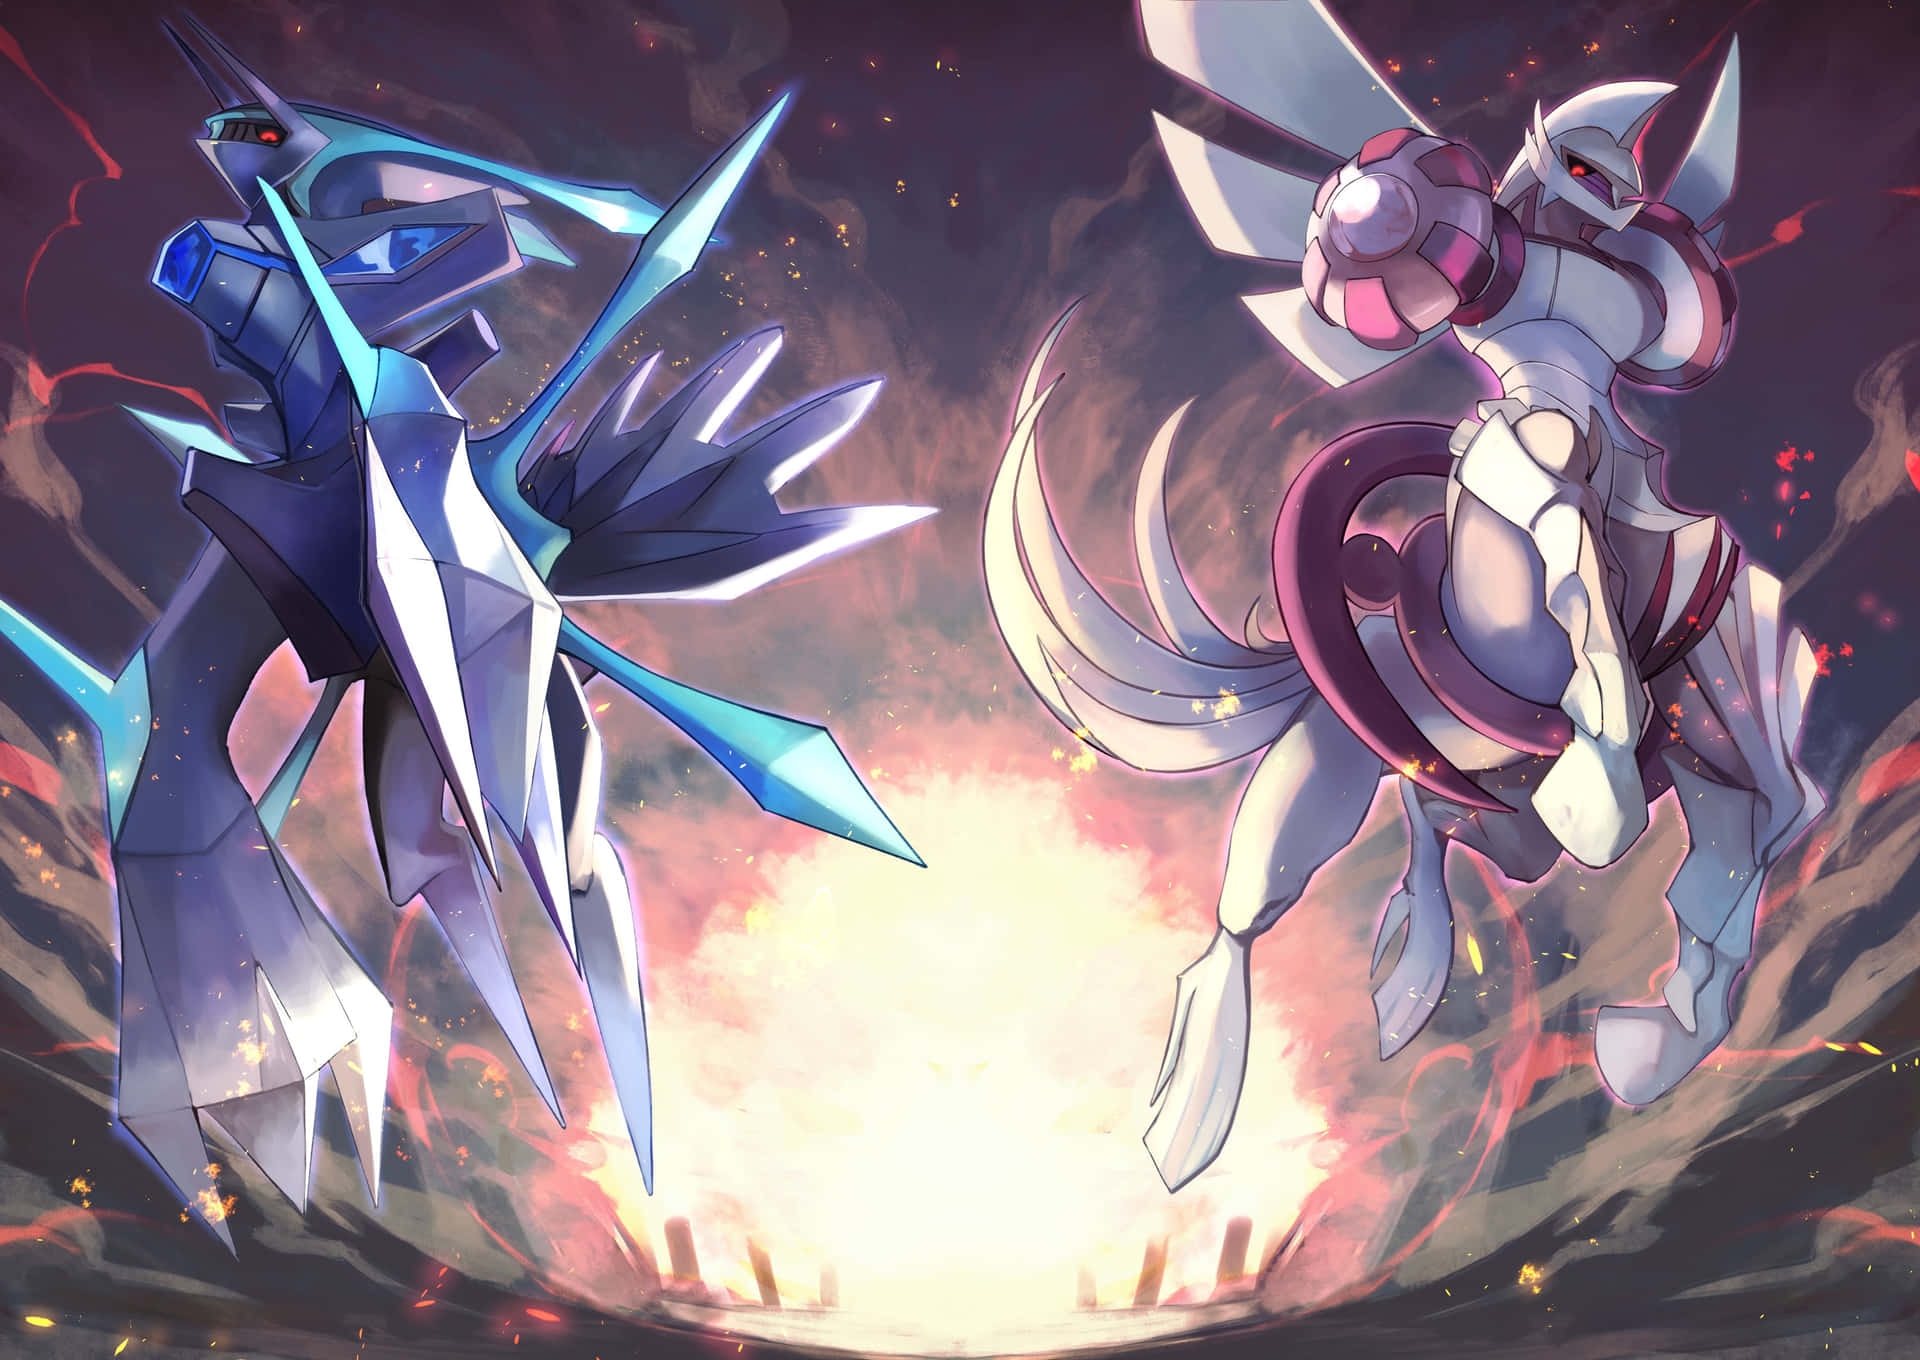 Take a journey through time and space with Dialga